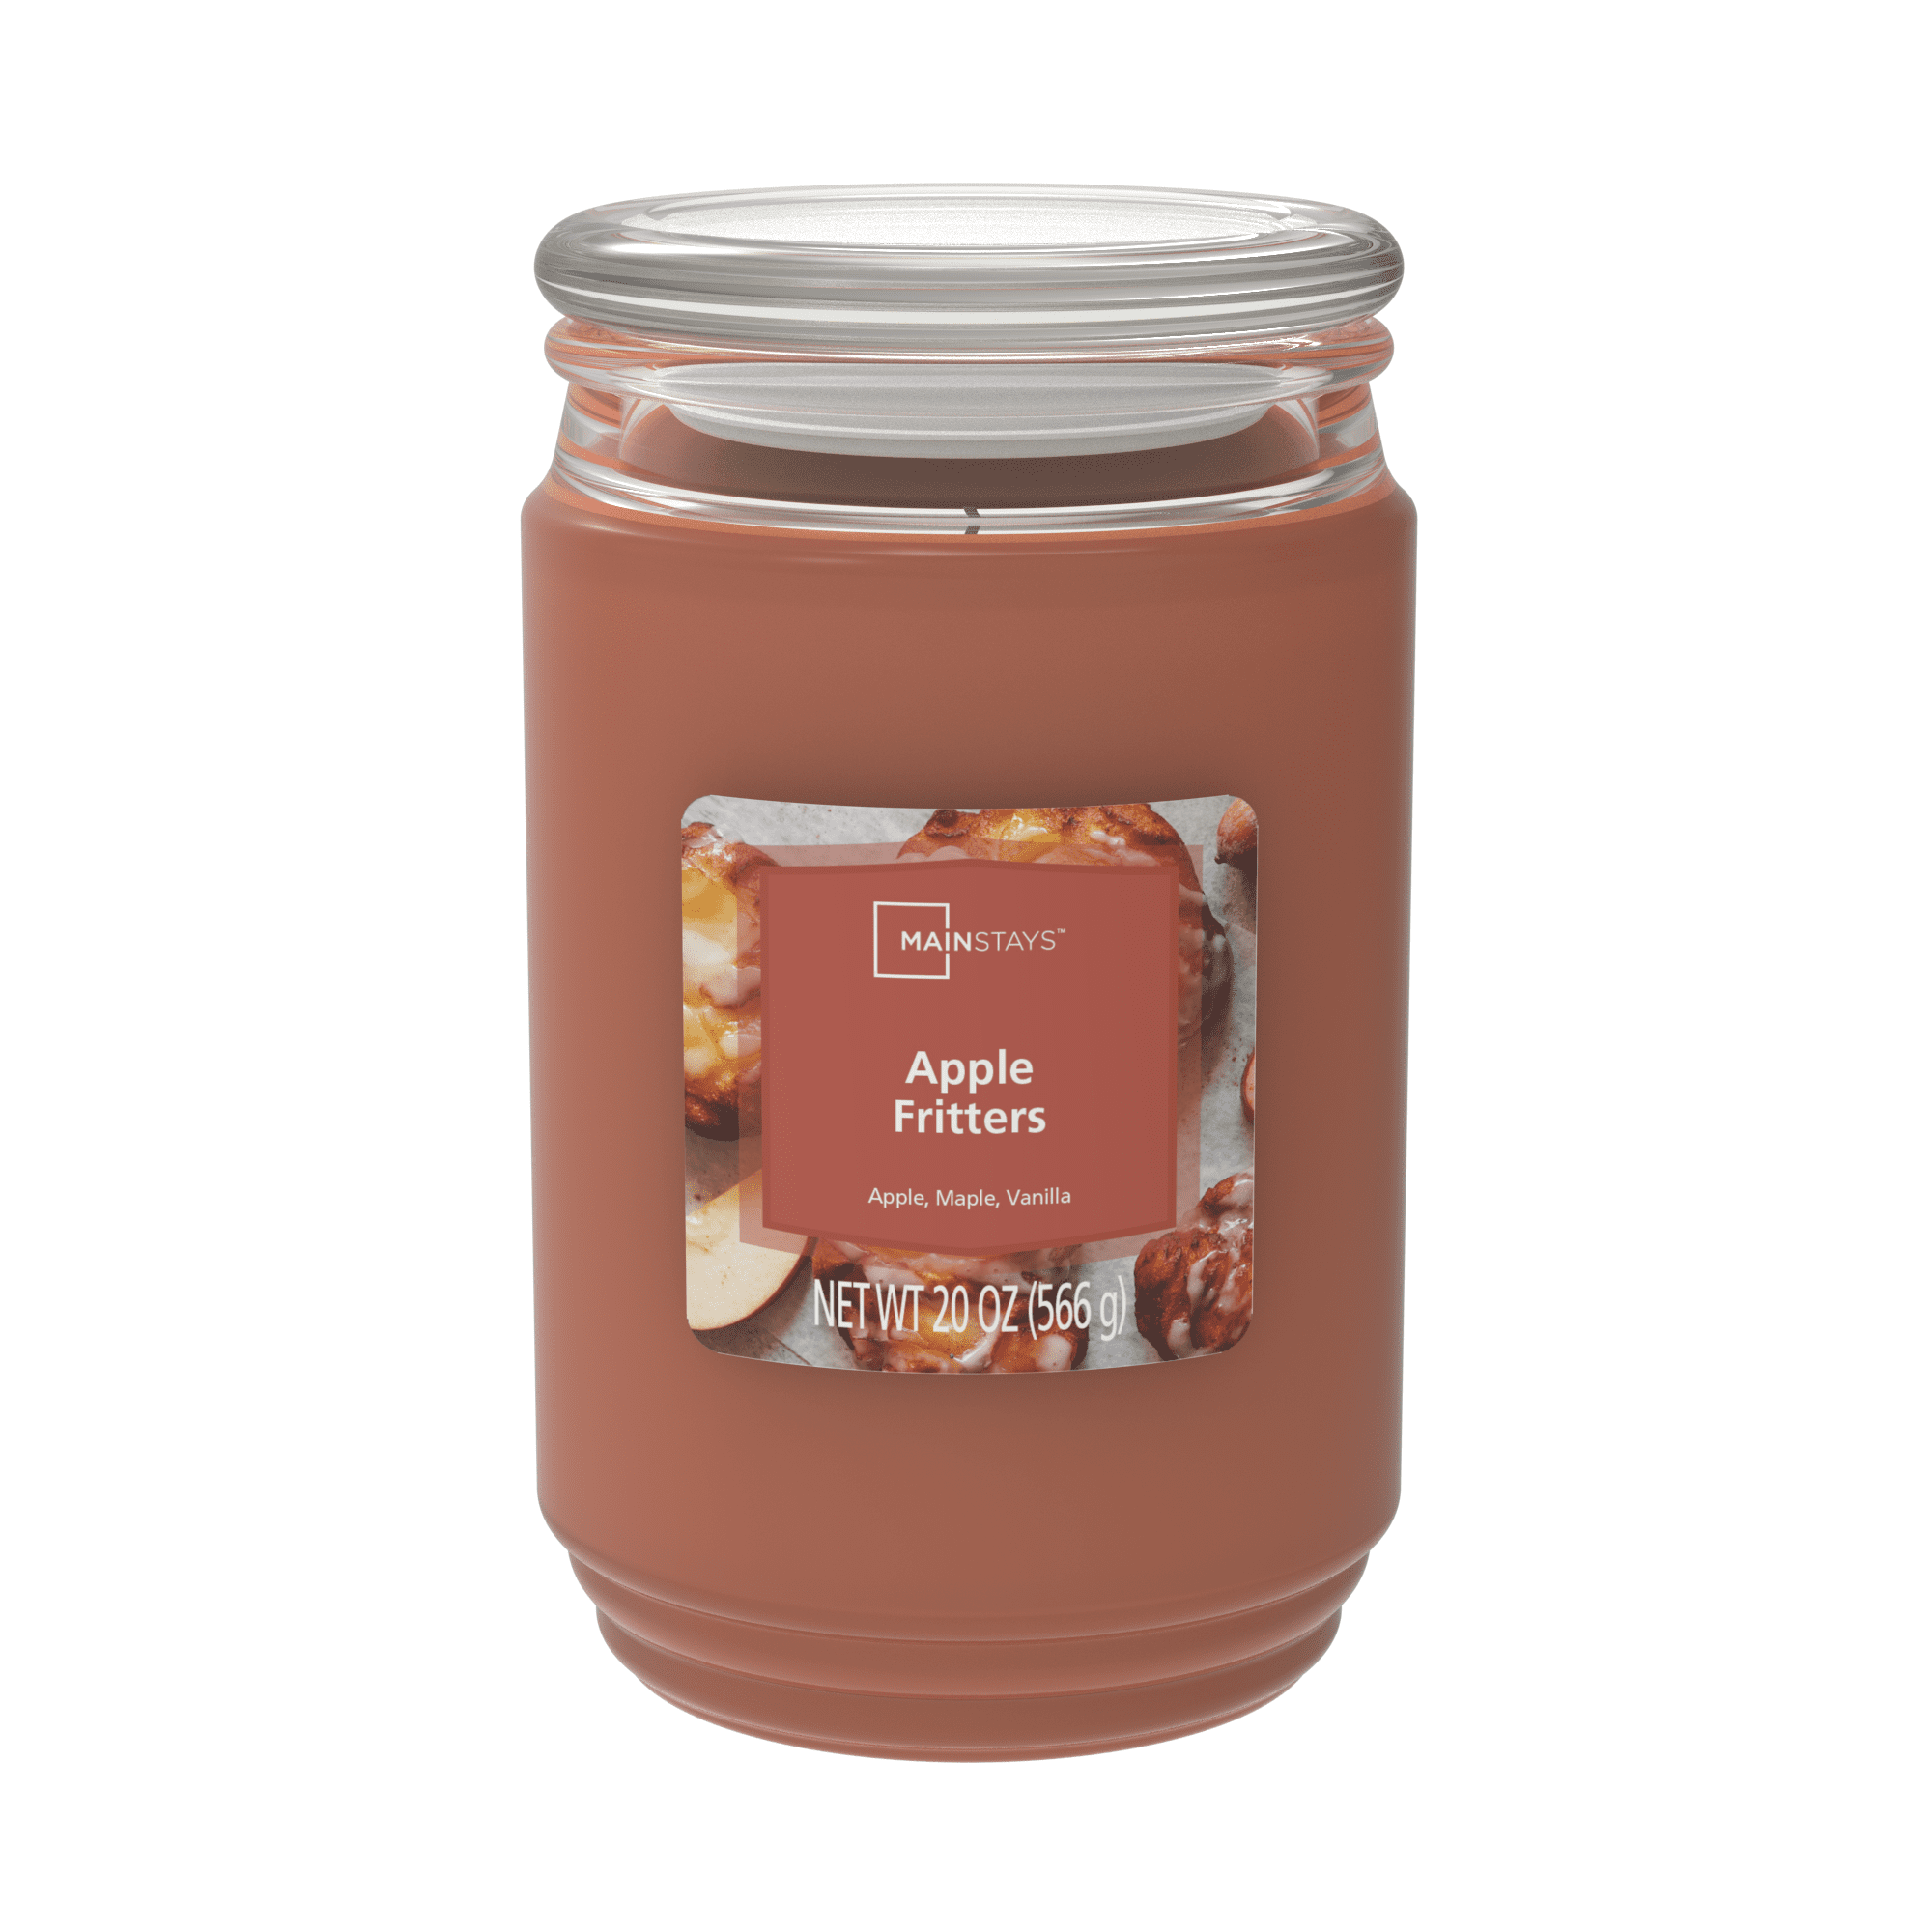 Mainstays Apple Fritters Single-Wick Glass Jar Candle, 20 oz.